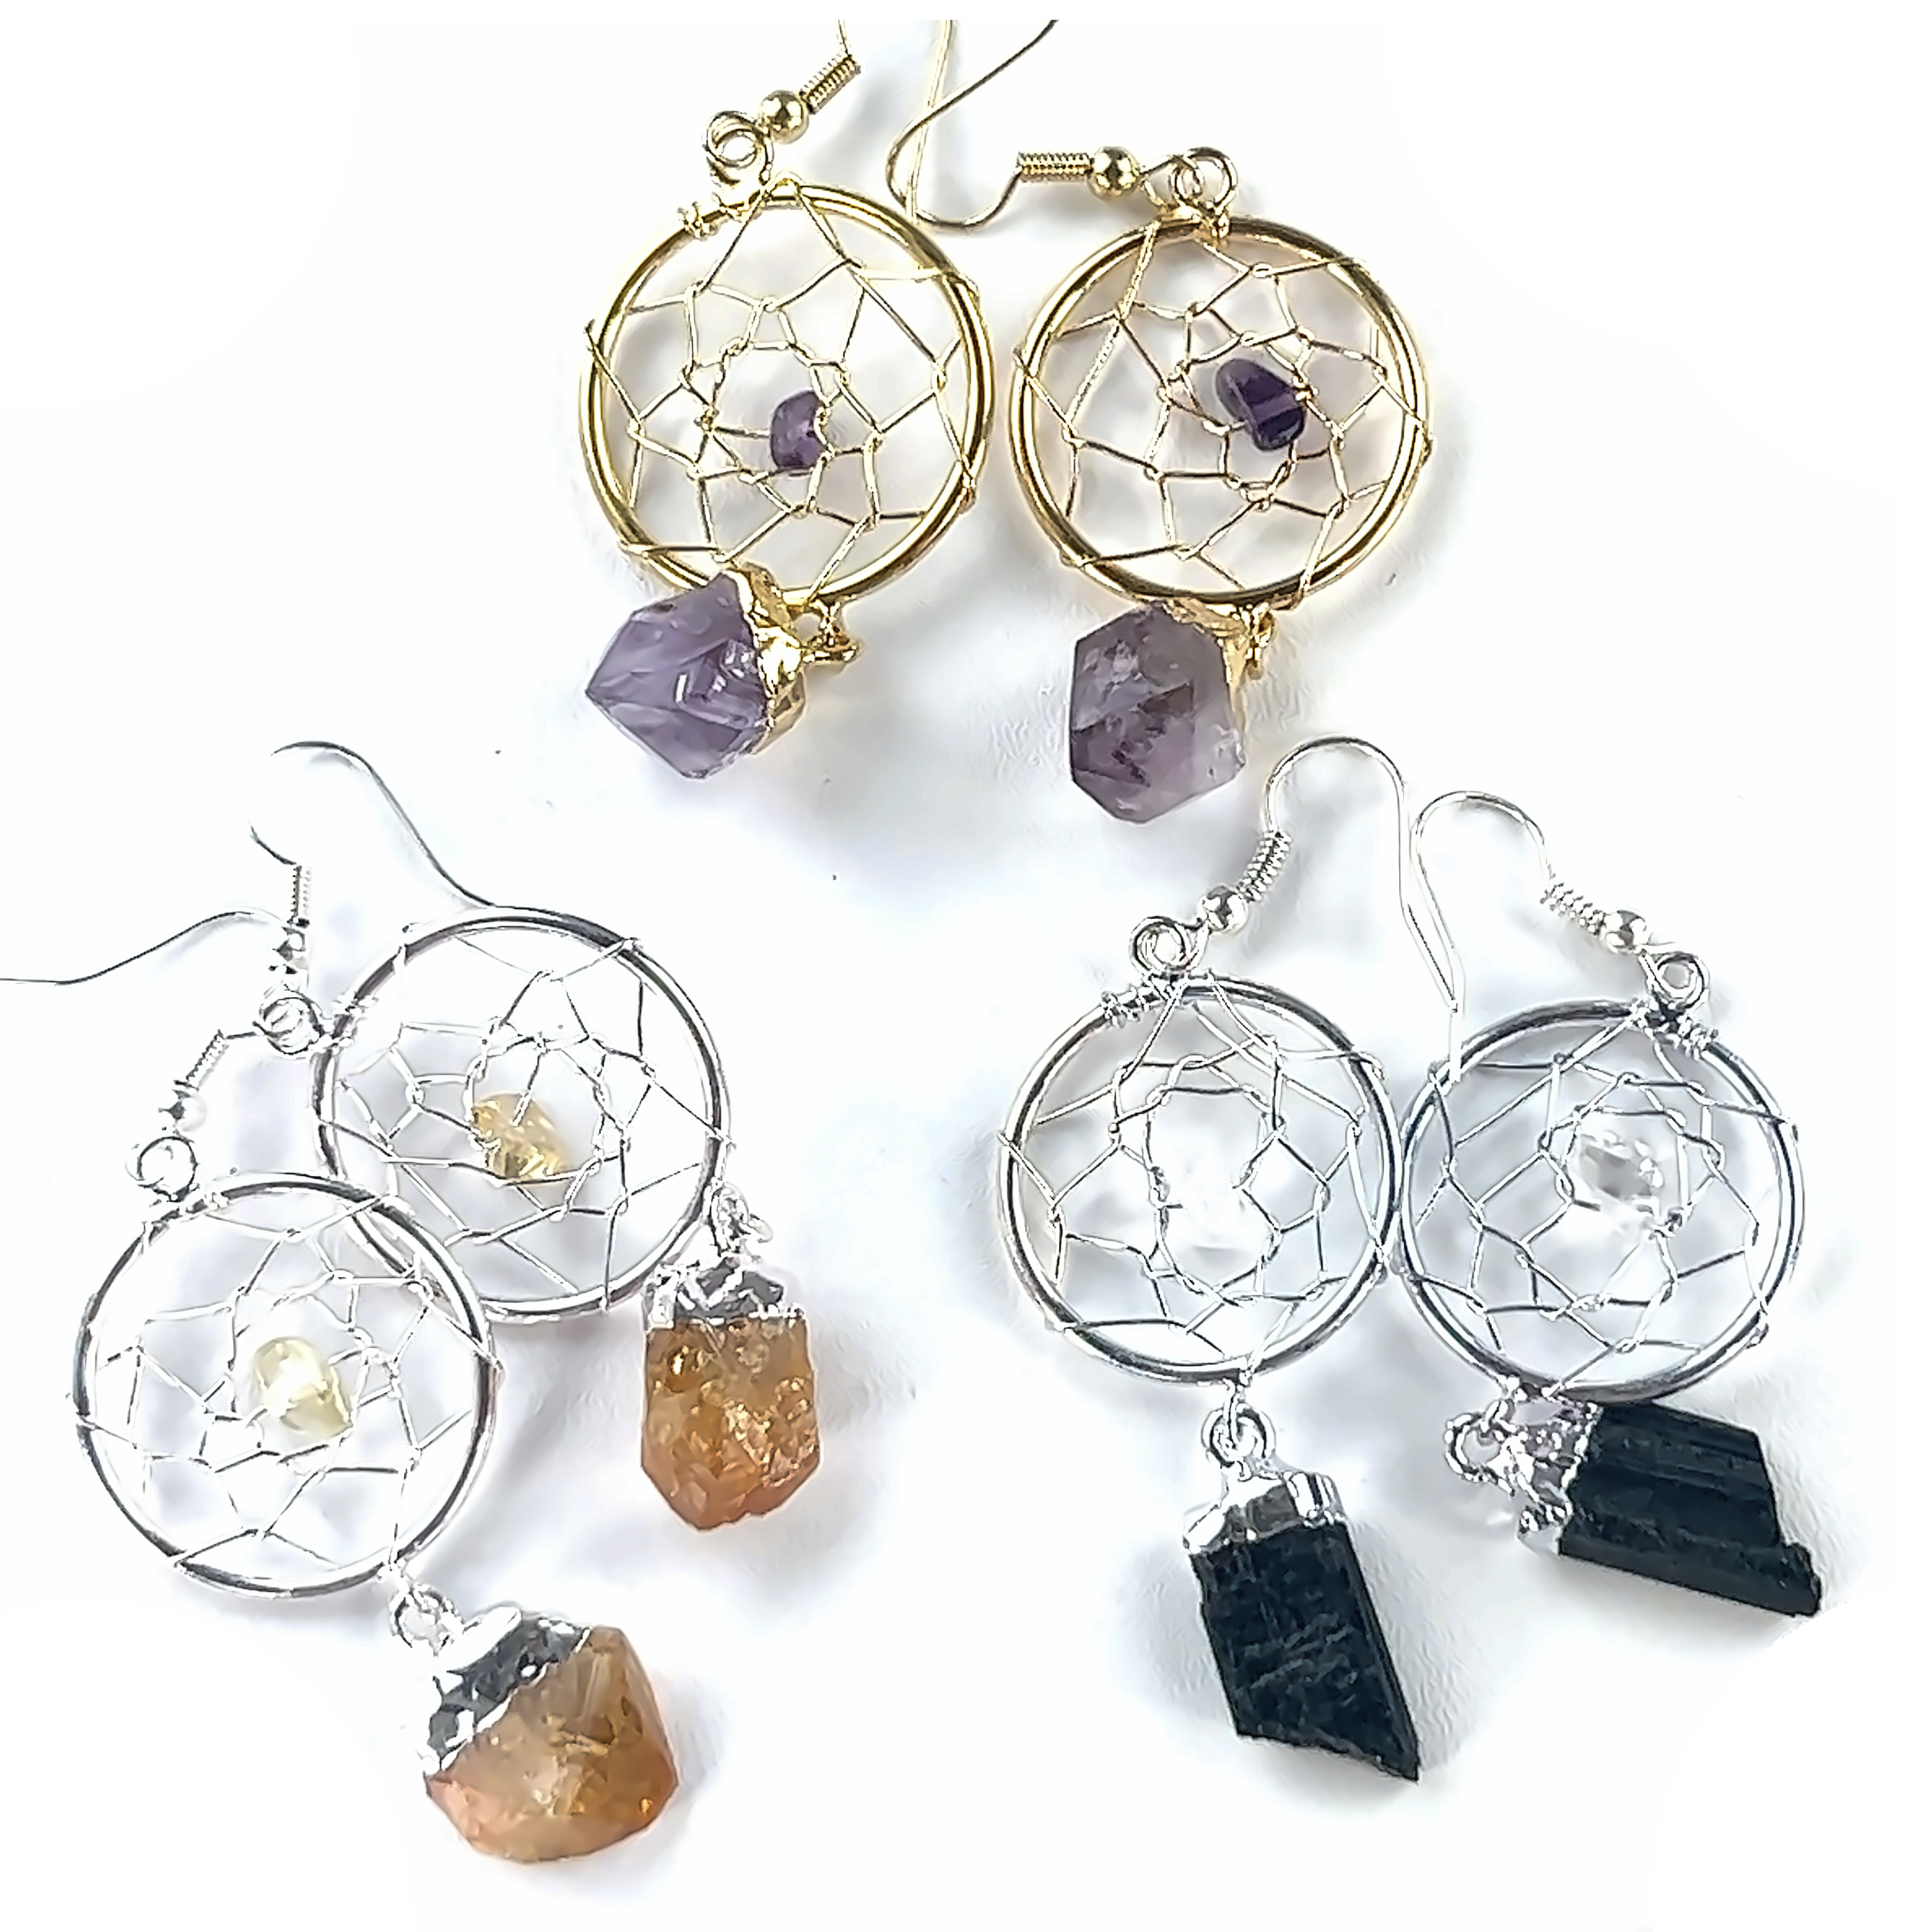 Discover more than 256 dream catcher earrings best